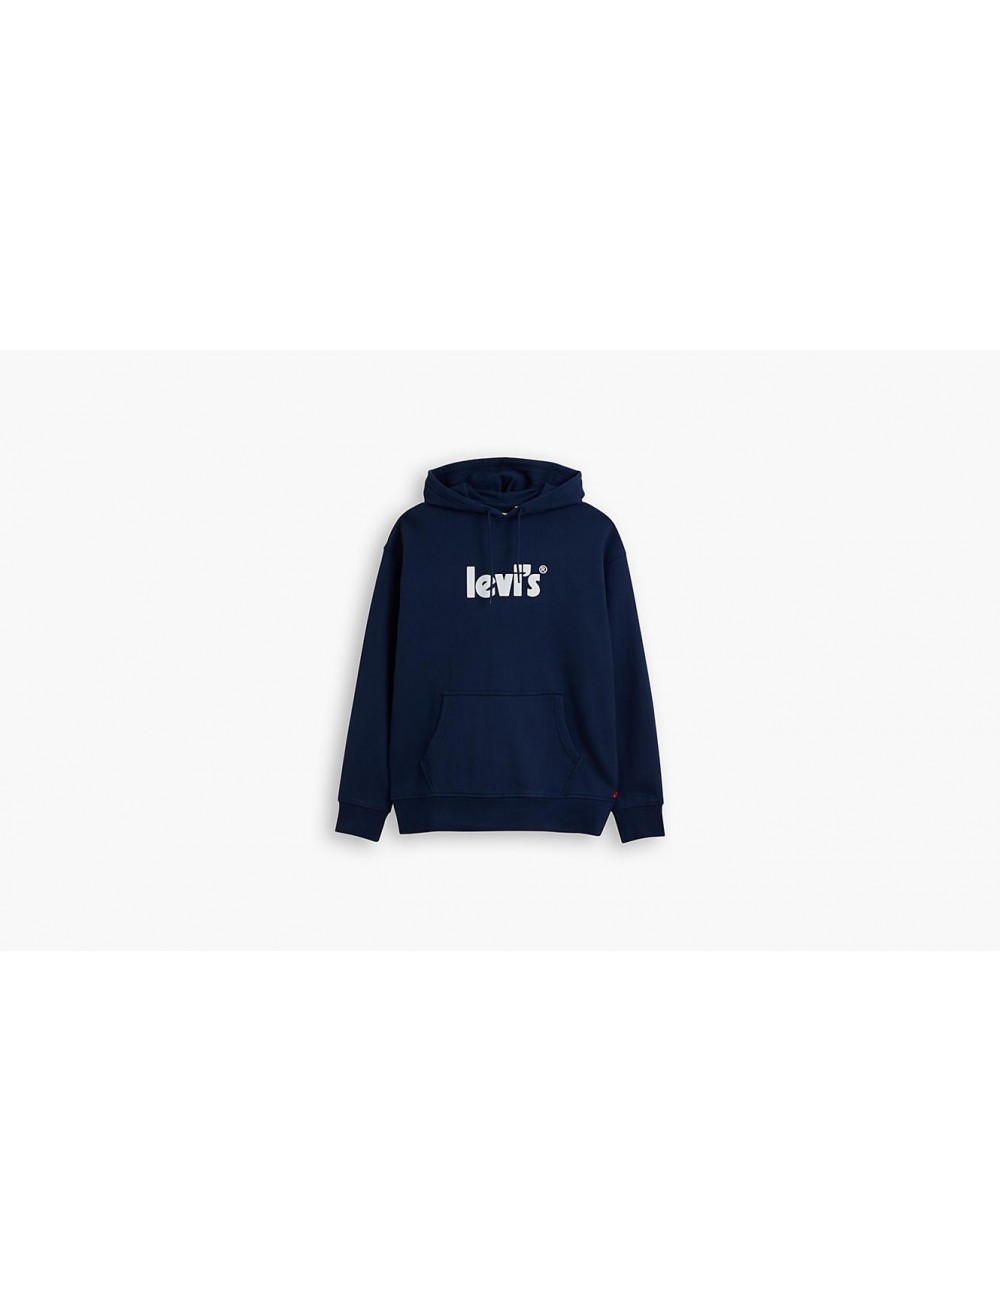 Levis graphic poster hoodie dres blues